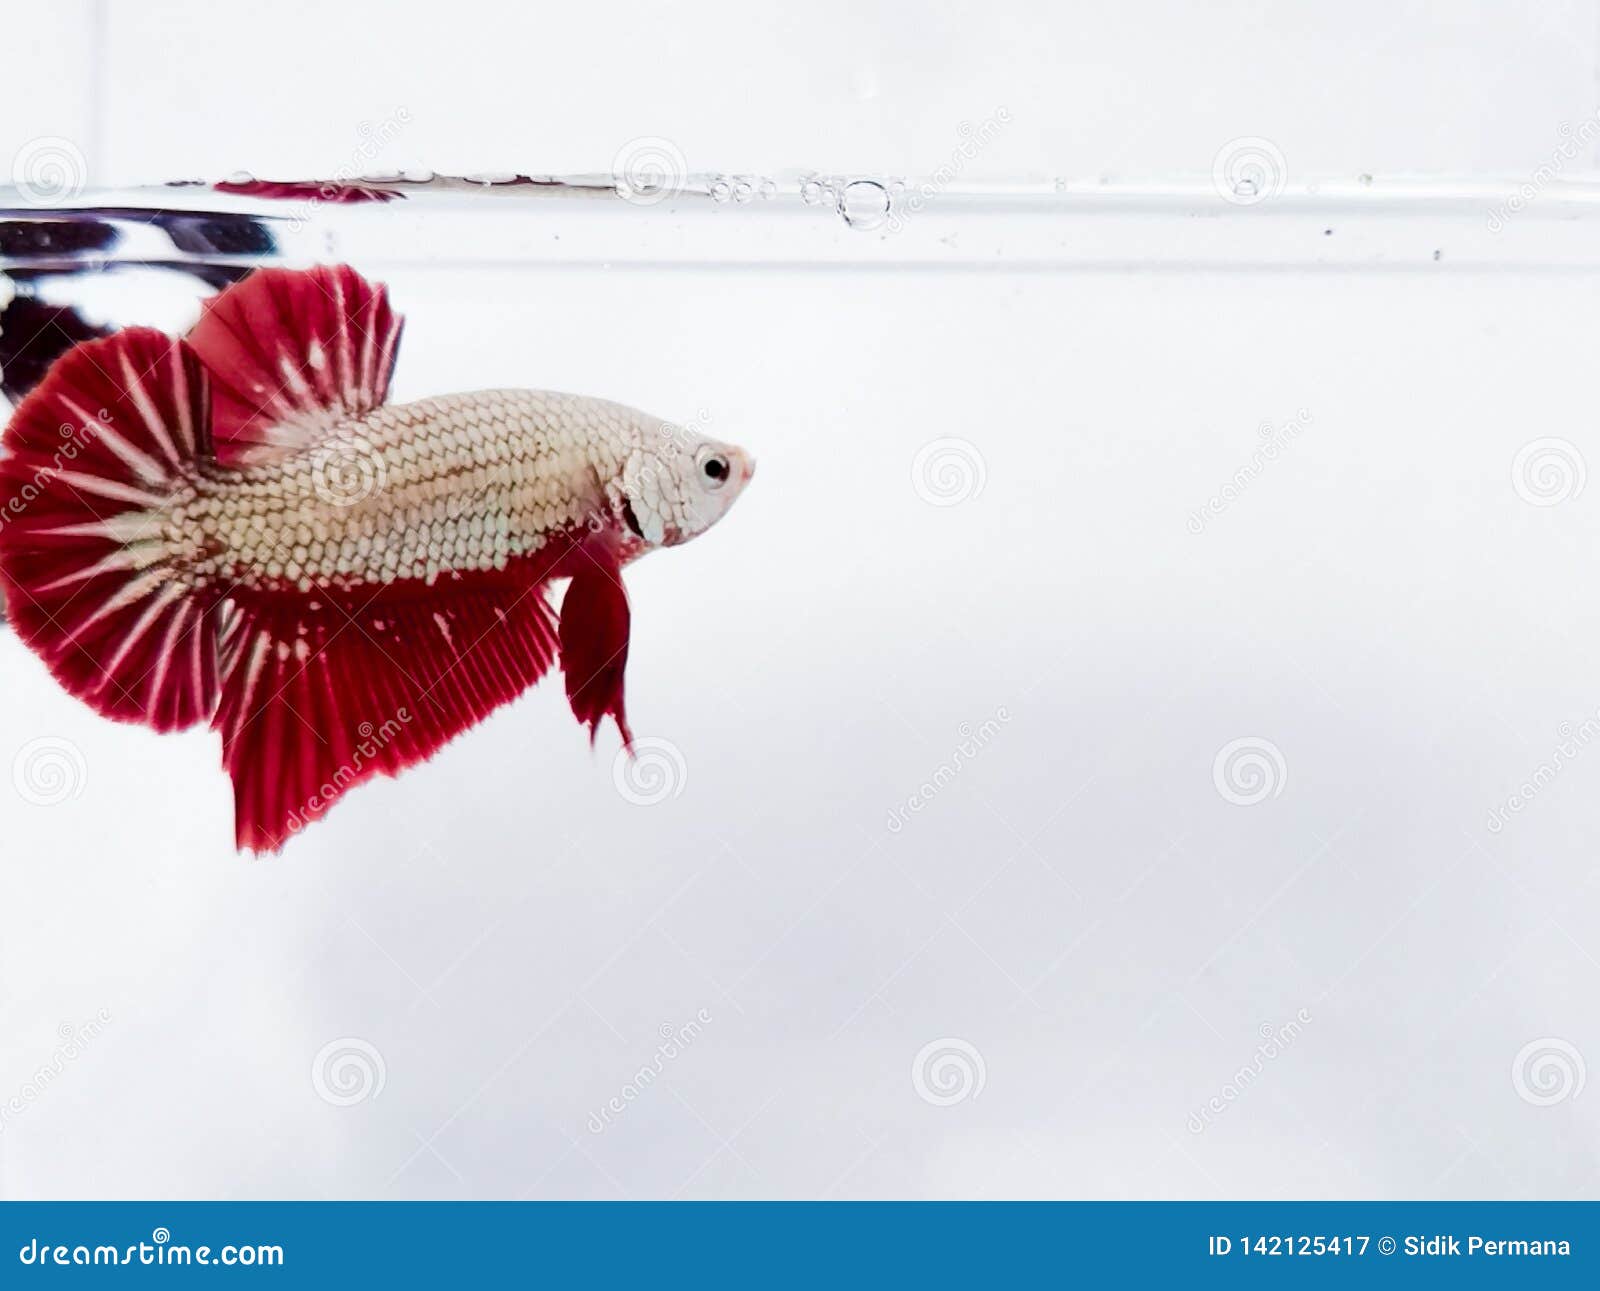 Red Golden Plakat Betta Fish with Fluffy Fins. Stock Image - Image of blue,  beauty: 142125417